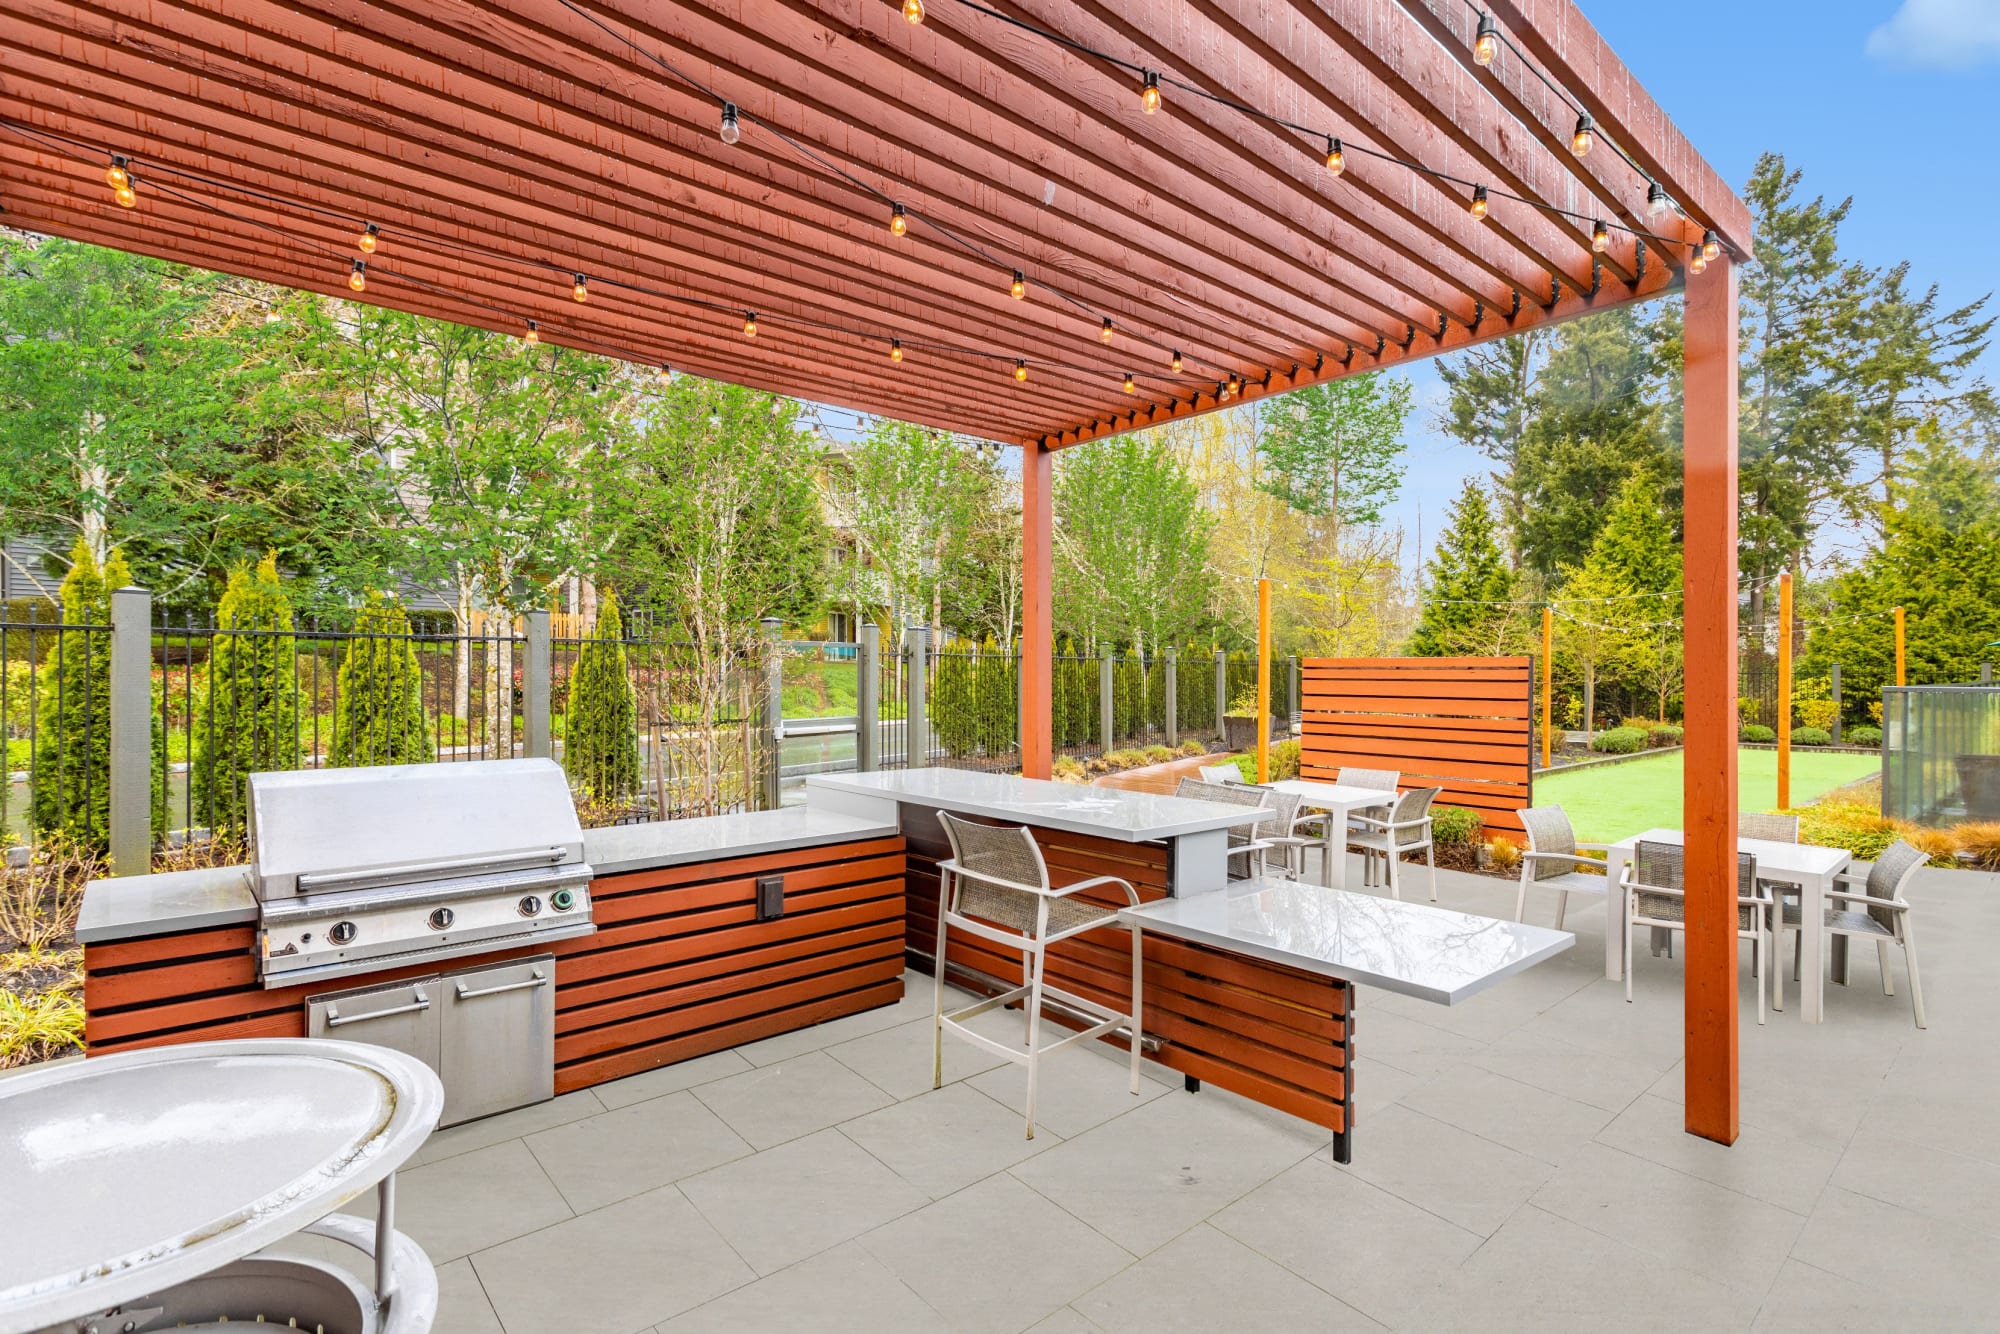 A grilling area and dining tables at Brookside Village in Auburn, Washington